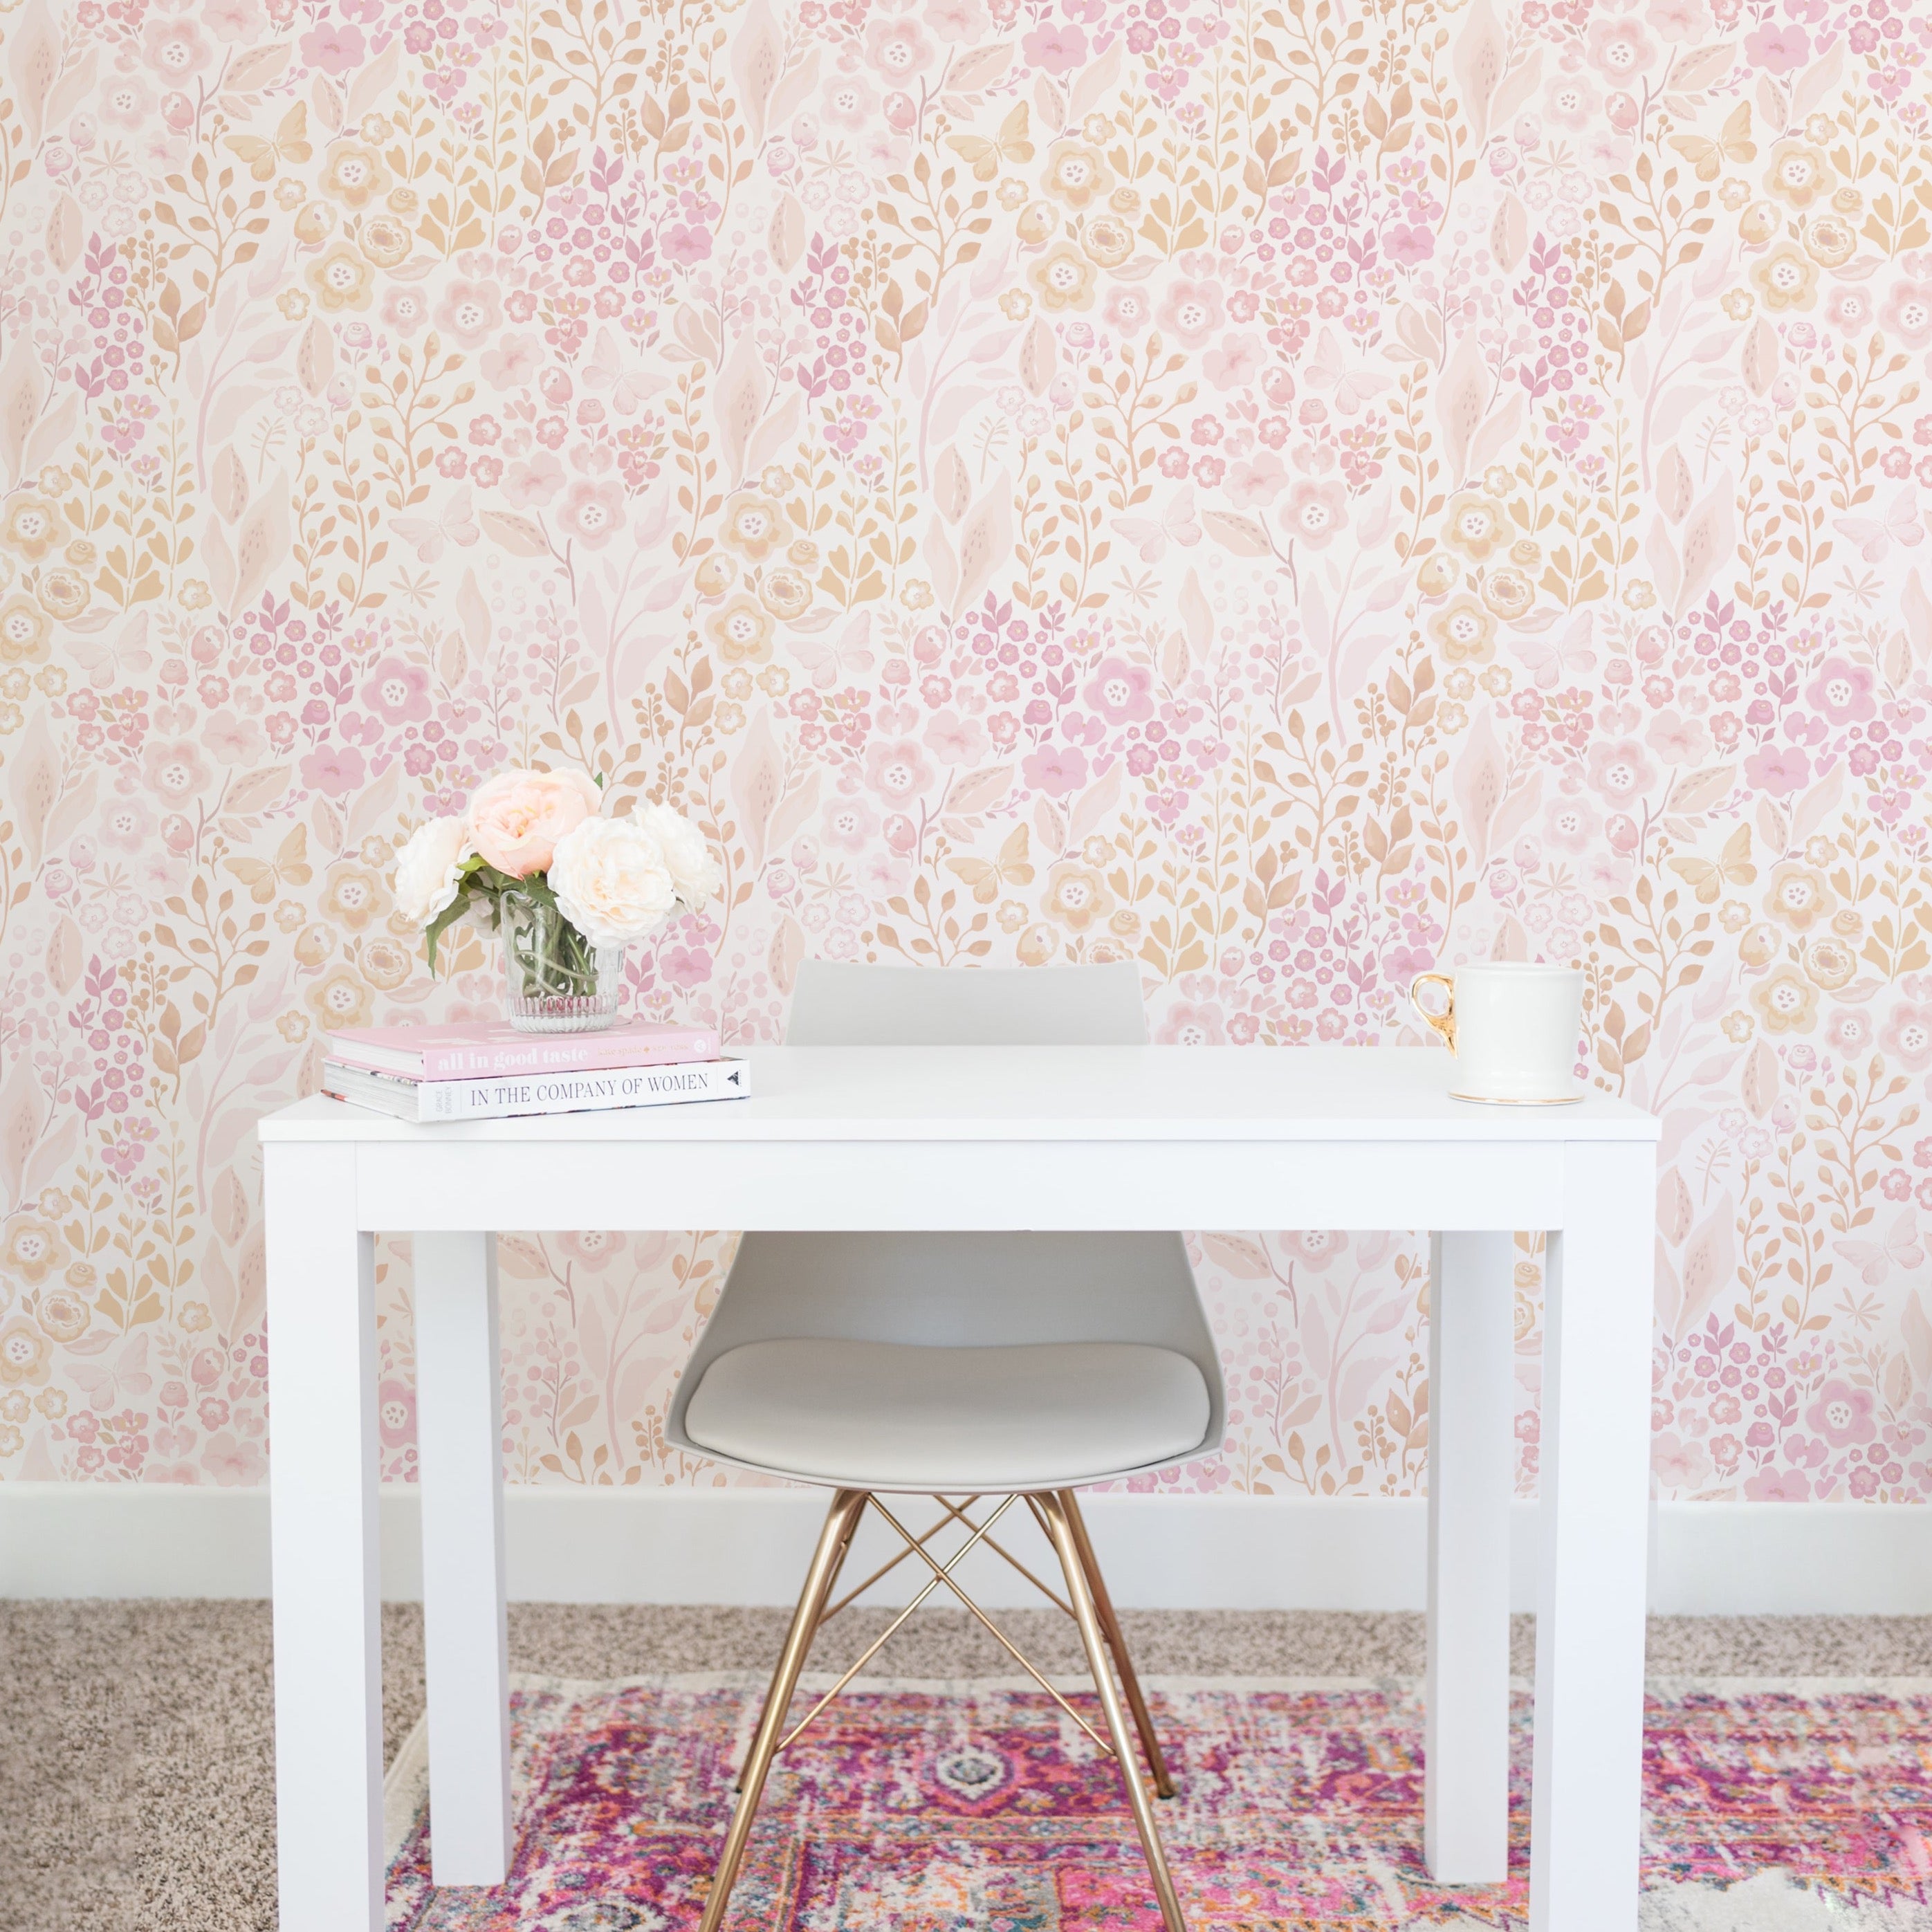 A bright and inviting workspace featuring the Pretty Petals Wallpaper - 25" adorned with blush pink and beige floral patterns. The wallpaper adds a romantic touch to the space, complementing a sleek white desk, a modern gray chair with golden legs, and a vibrant multicolored rug beneath.